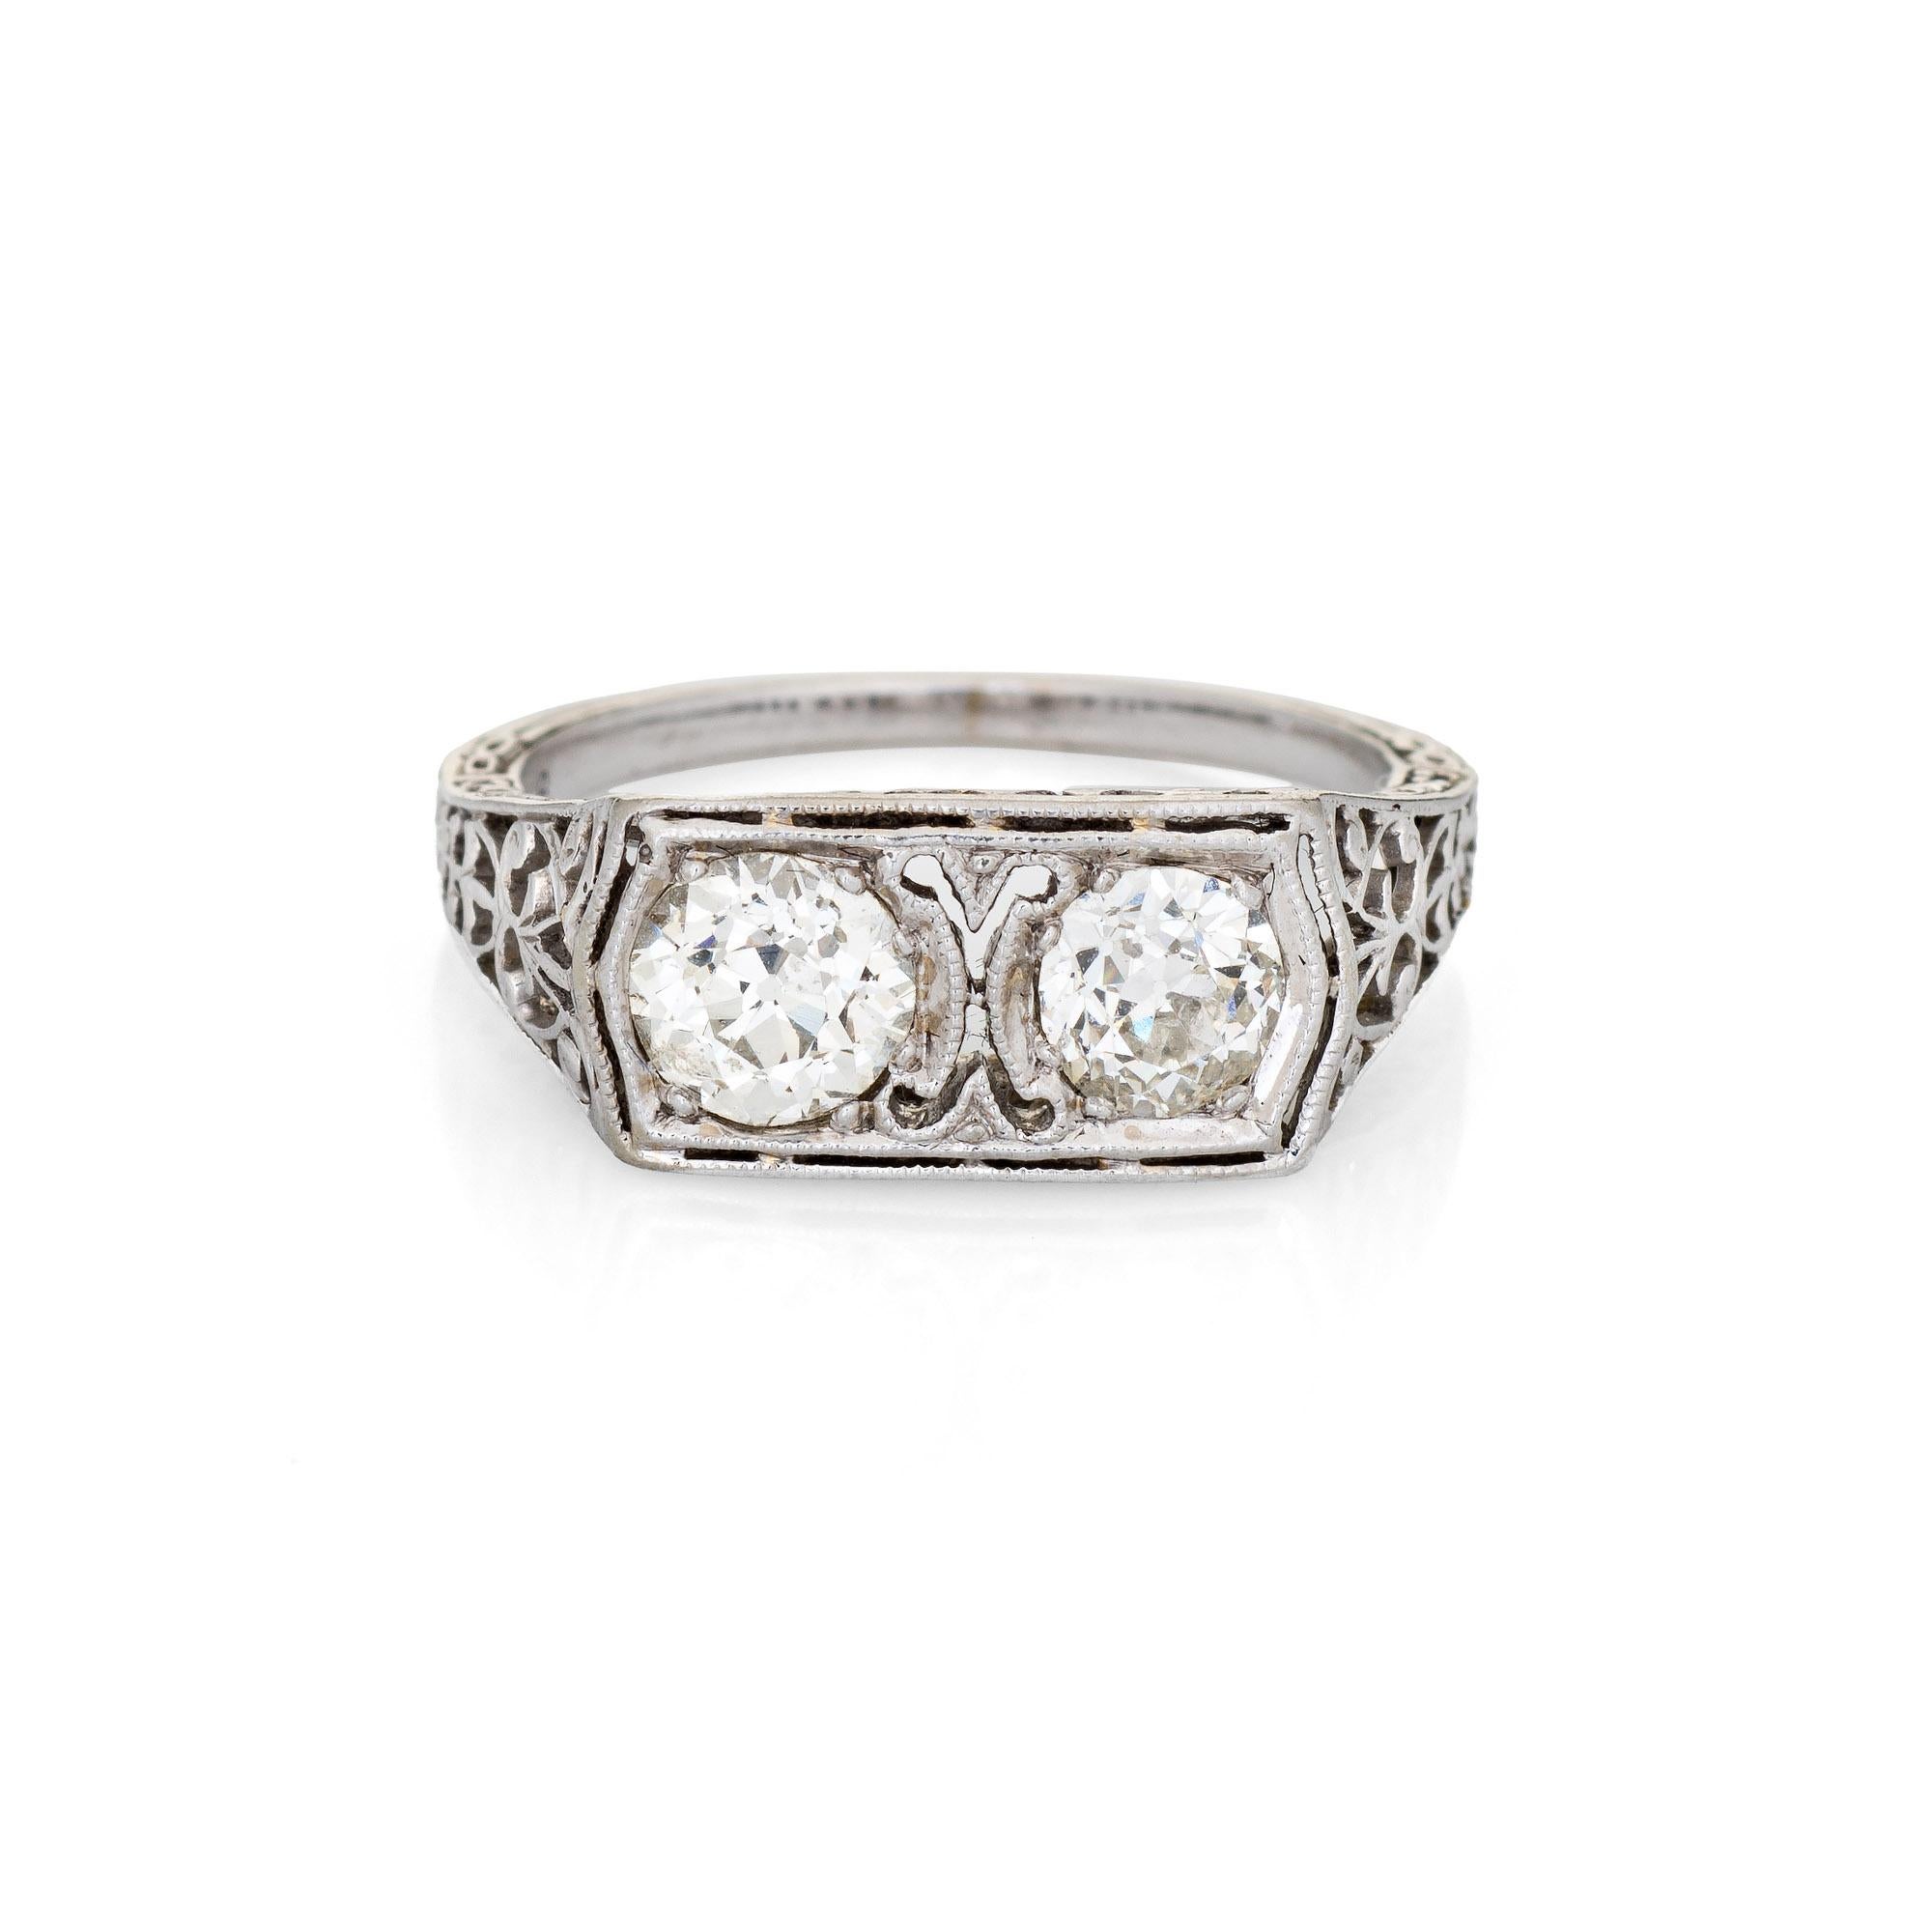 Finely detailed vintage Art Deco double diamond ring (circa 1920s to 1930s) crafted in 18k white gold.

Two old European cut diamonds are estimated at 0.62 carats each and total an estimated 1.25 carats (estimated at I-J color and VS2-SI1 clarity). 